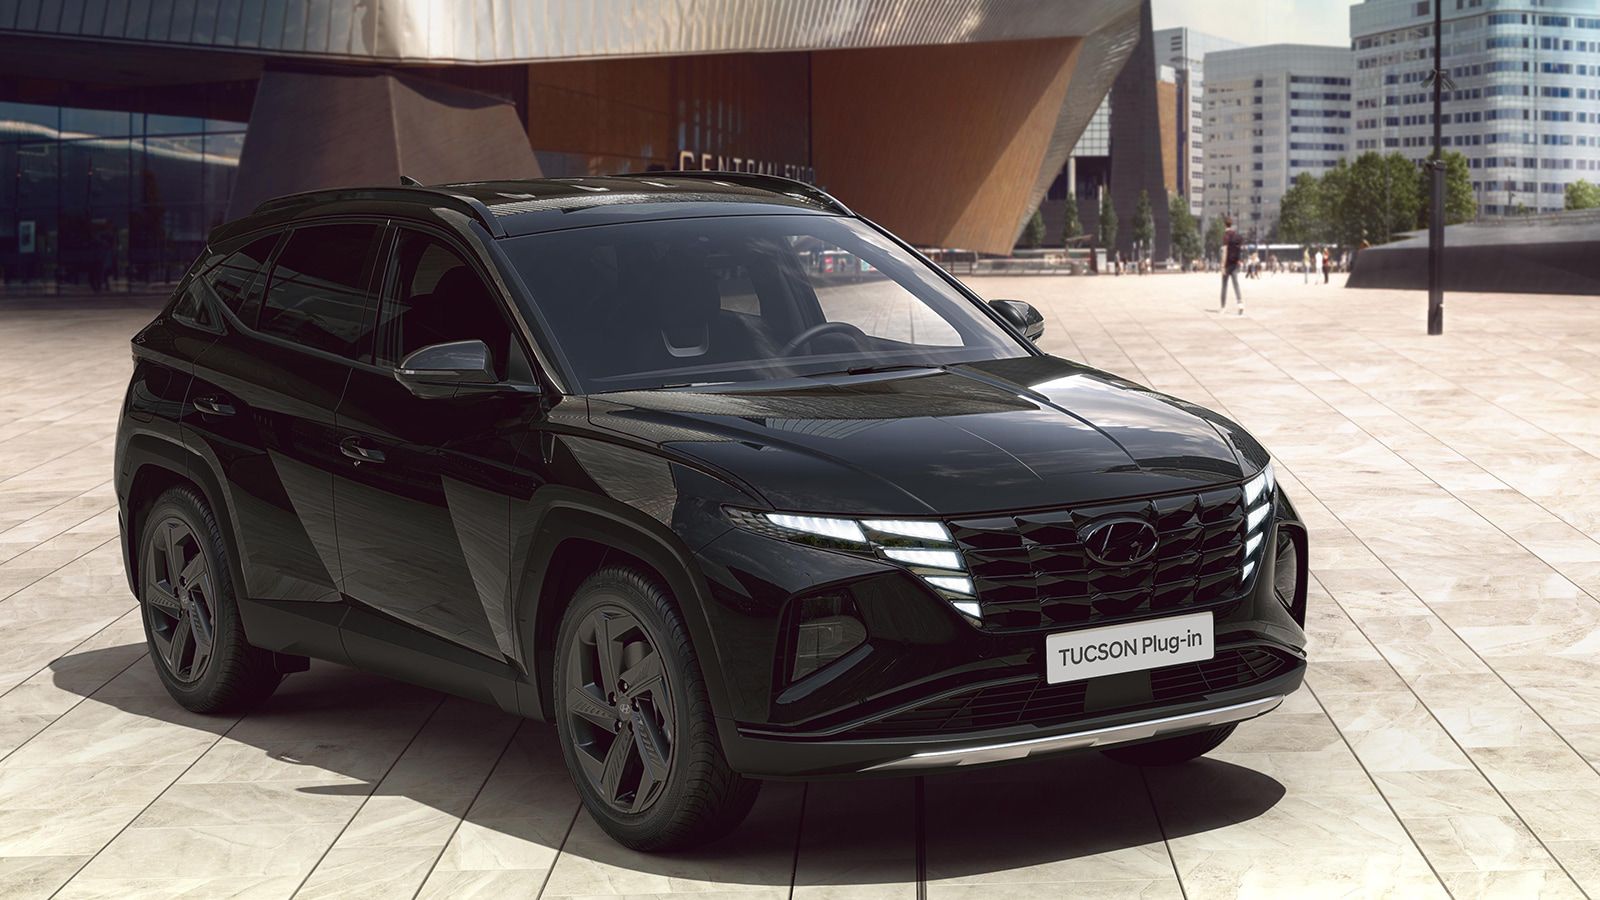 Hyundai TUCSON Plug-in Hybrid in Abyss Black Pearl from the front